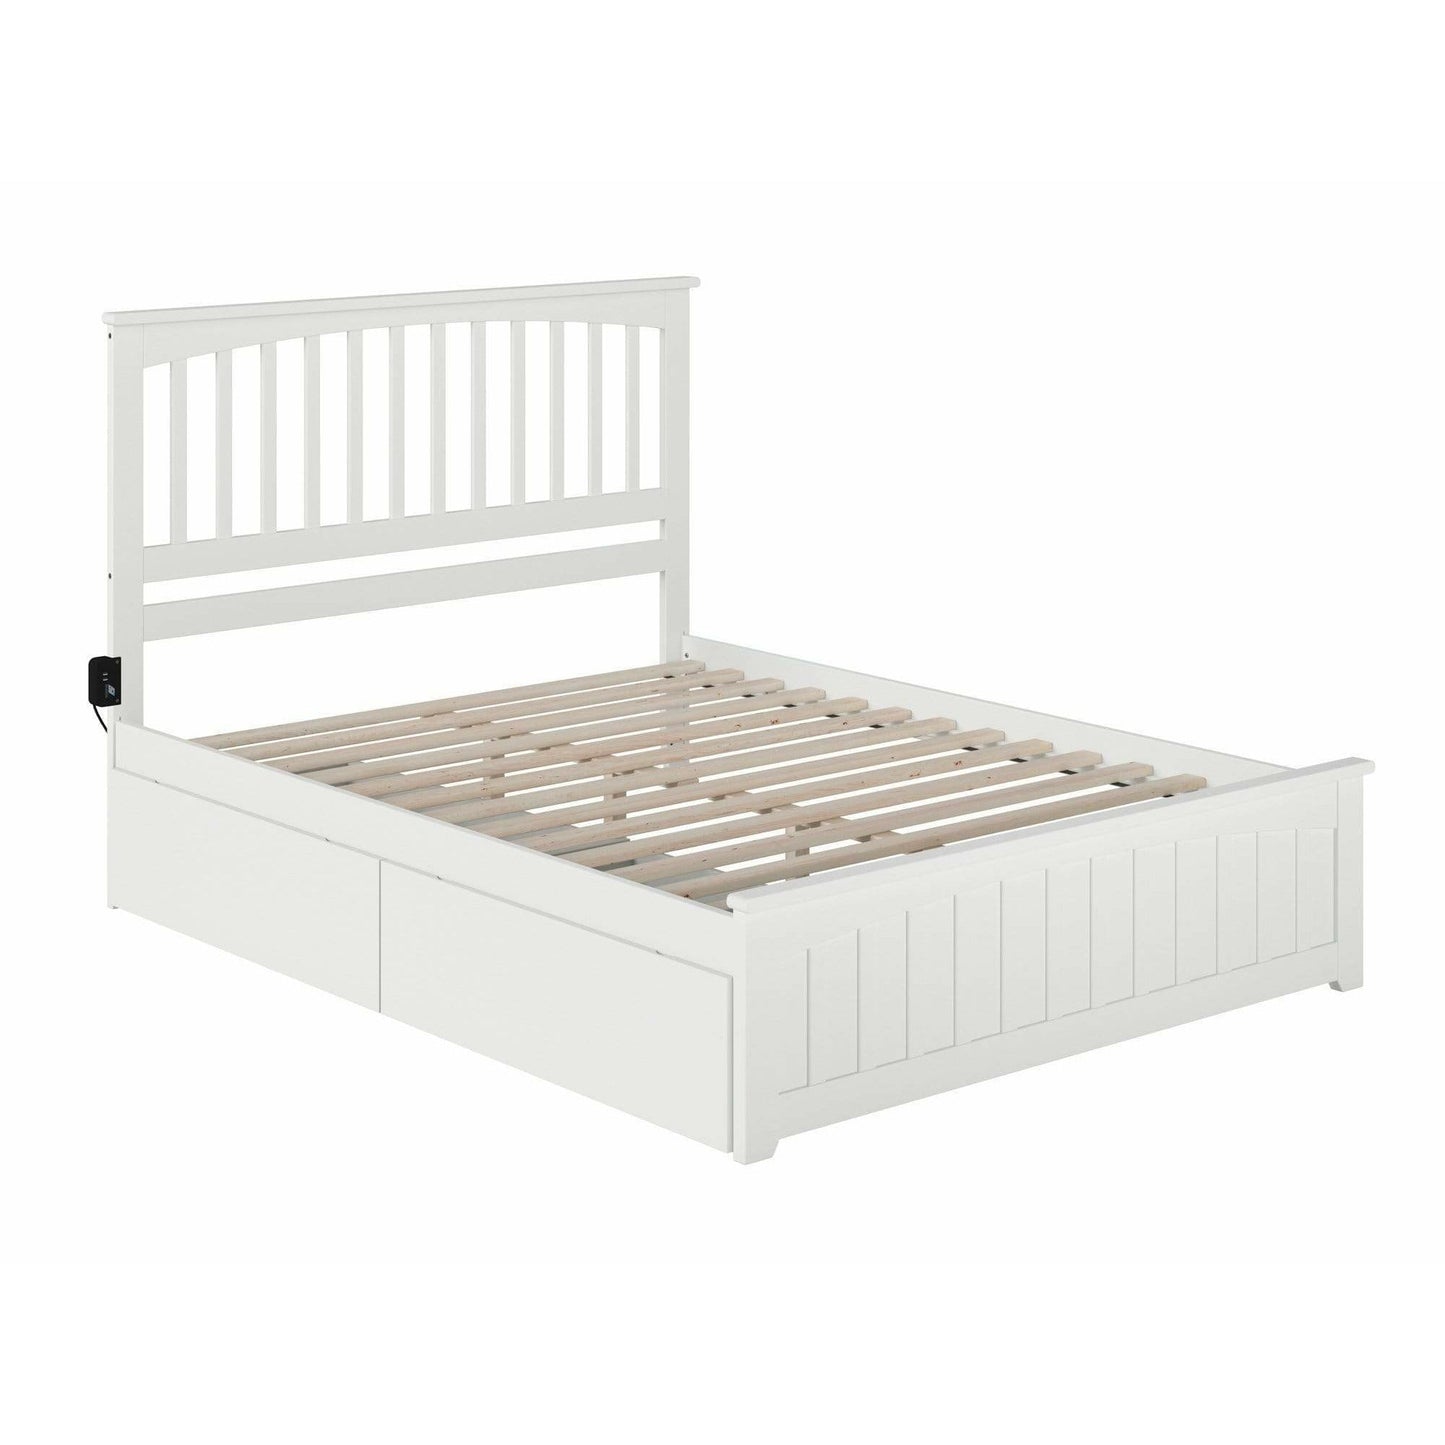 Atlantic Furniture Bed Mission Queen Platform Bed with Matching Foot Board with 2 Urban Bed Drawers in Espresso